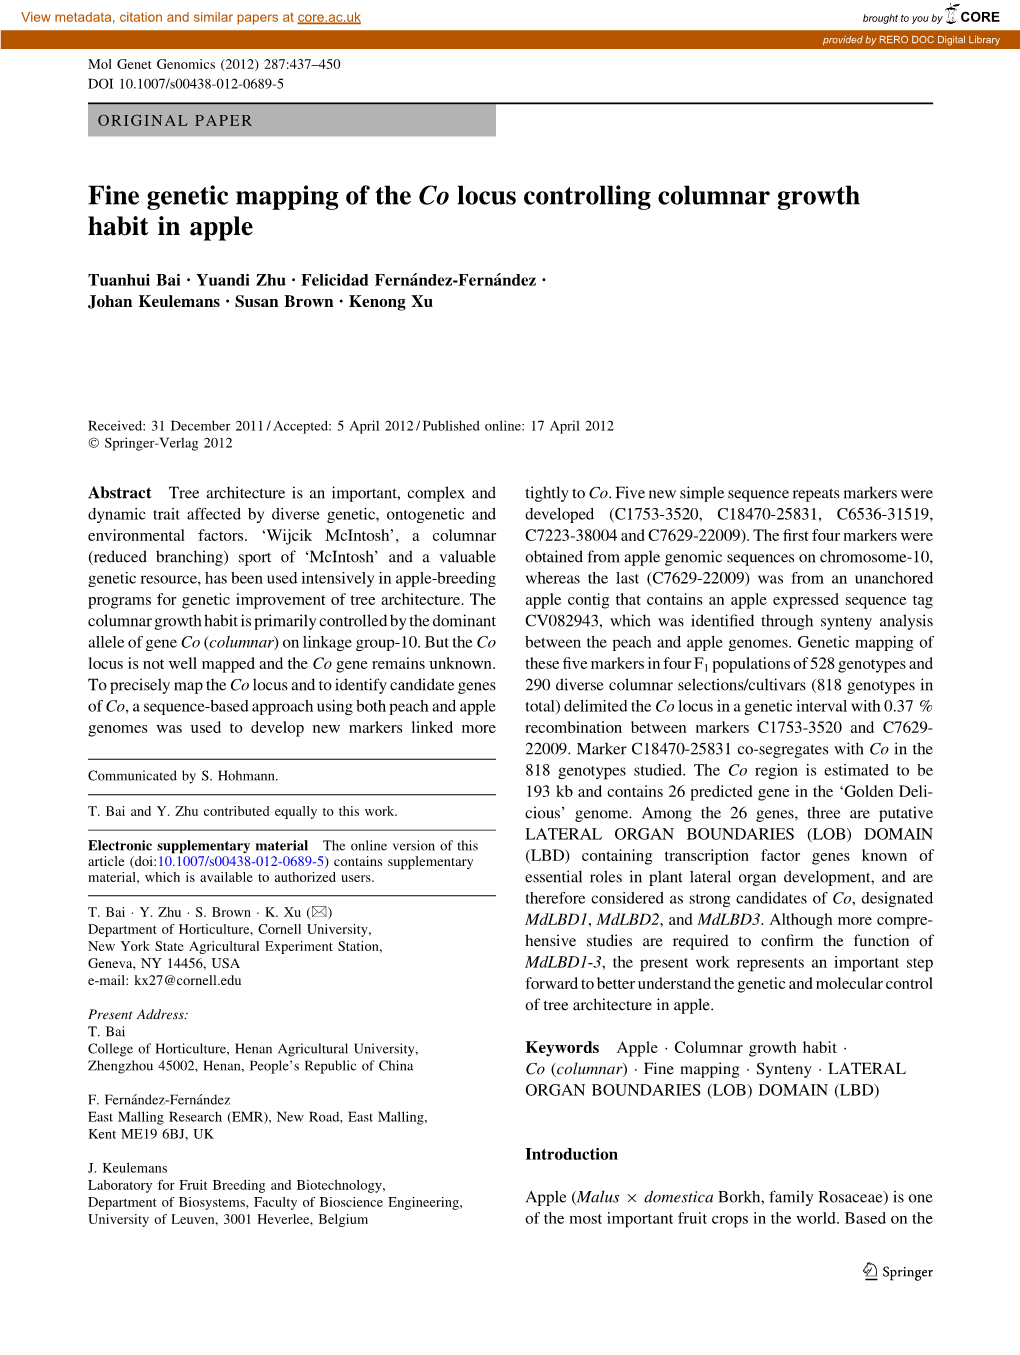 Fine Genetic Mapping of the Co Locus Controlling Columnar Growth Habit in Apple